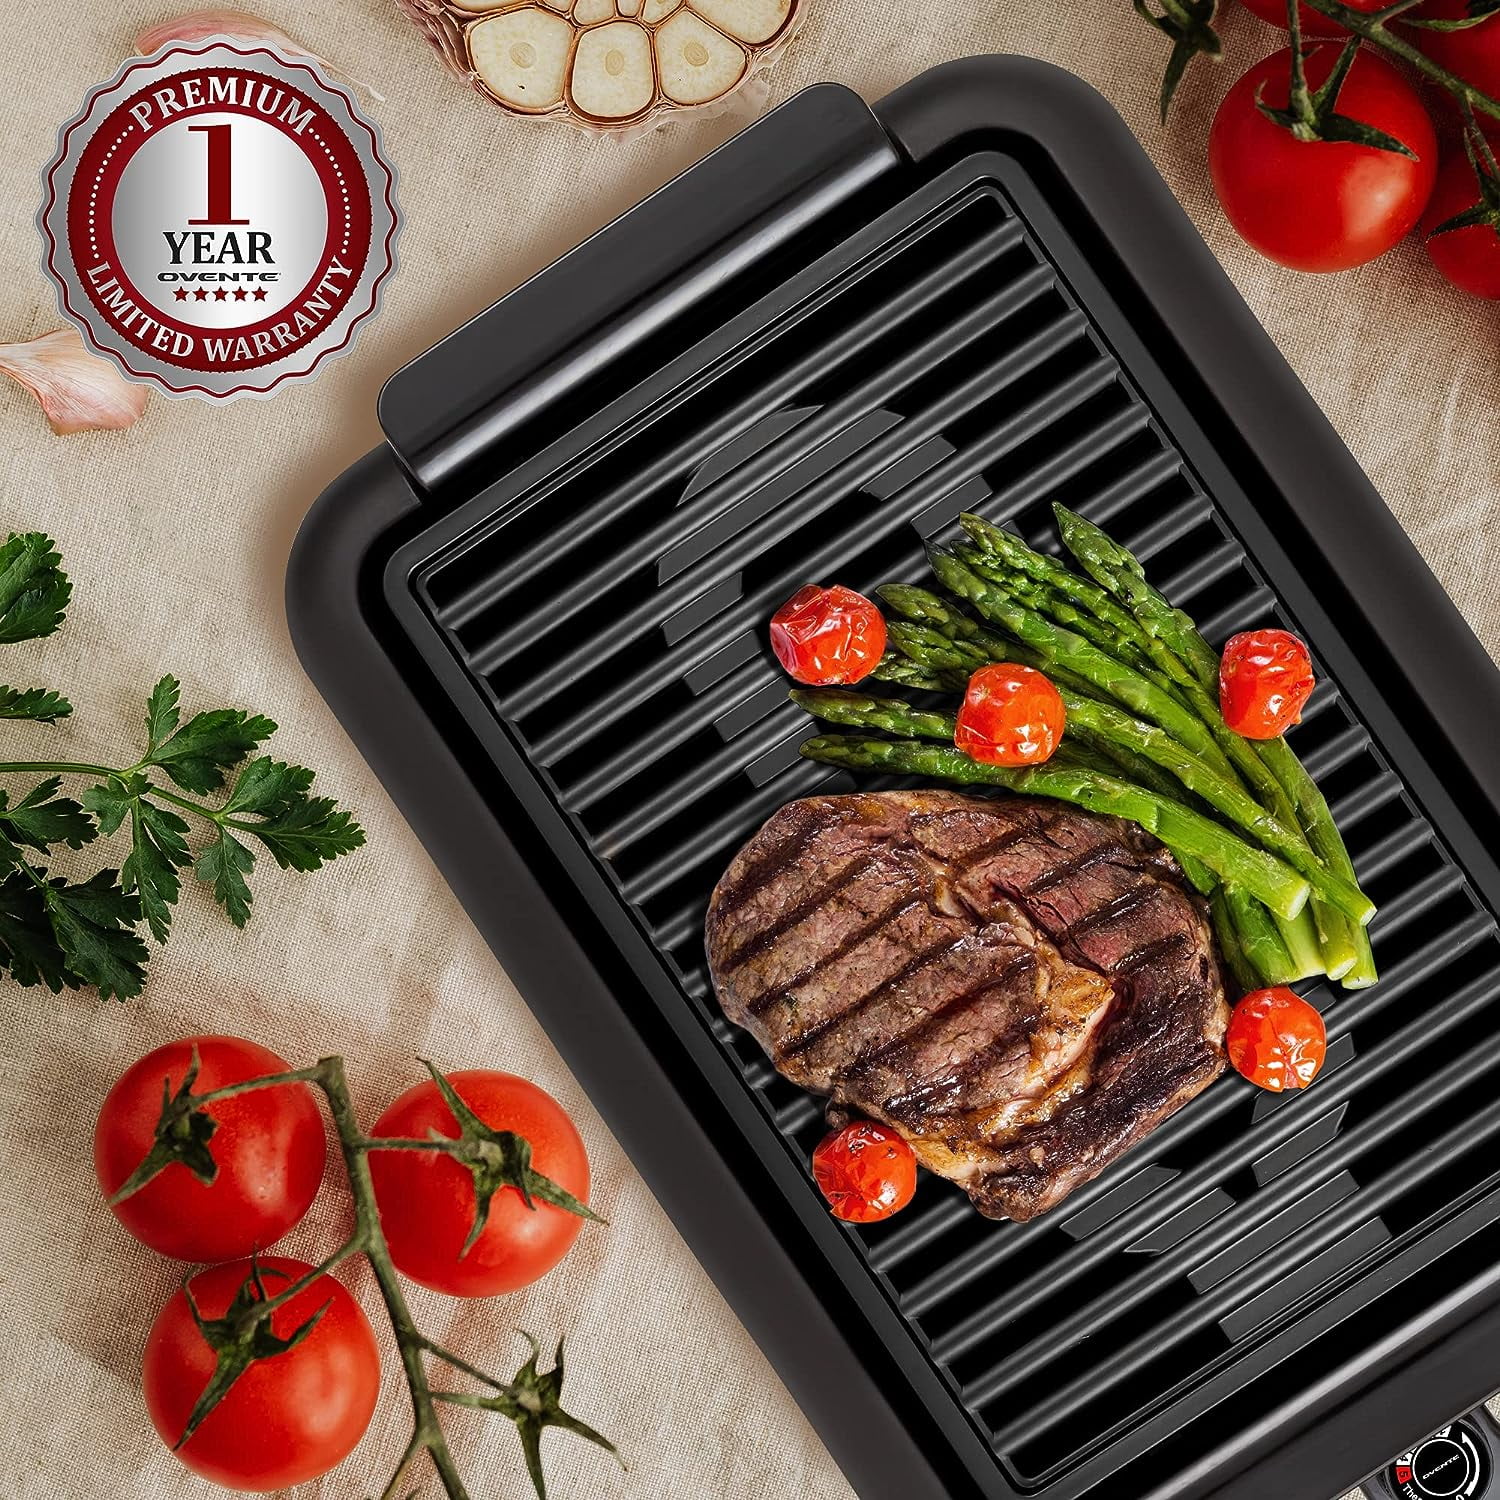 OVENTE Electric Griddle with 16 x 10 Inch Flat Non-Stick Cooking Surface,  Adjustable Thermostat, Essential Indoor Grill for Instant Breakfast  Pancakes